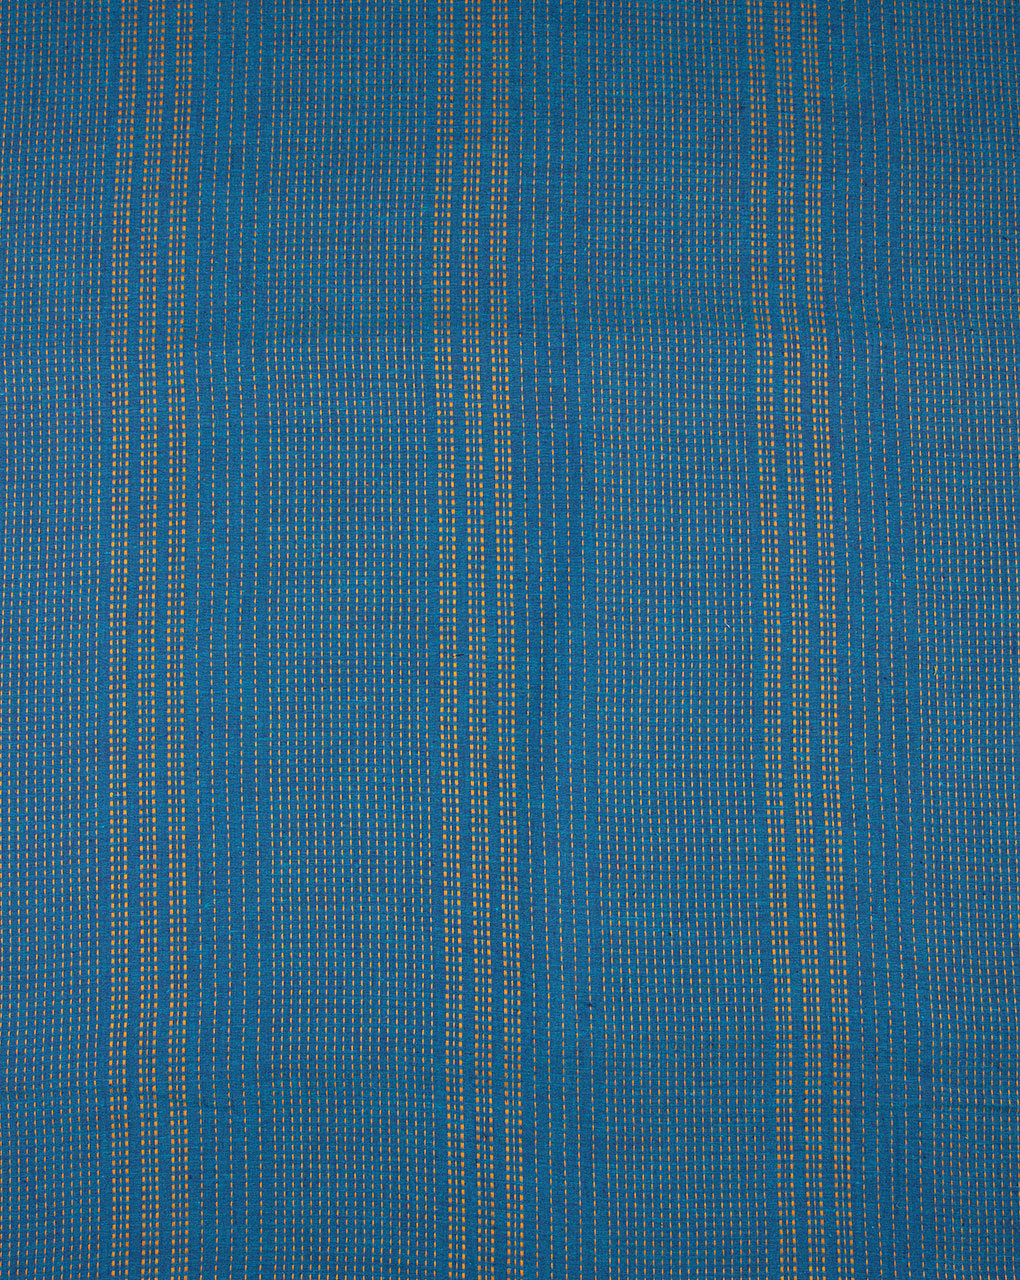 Stripes Woven Loom Textured Kantha Cotton Fabric - Fabriclore.com